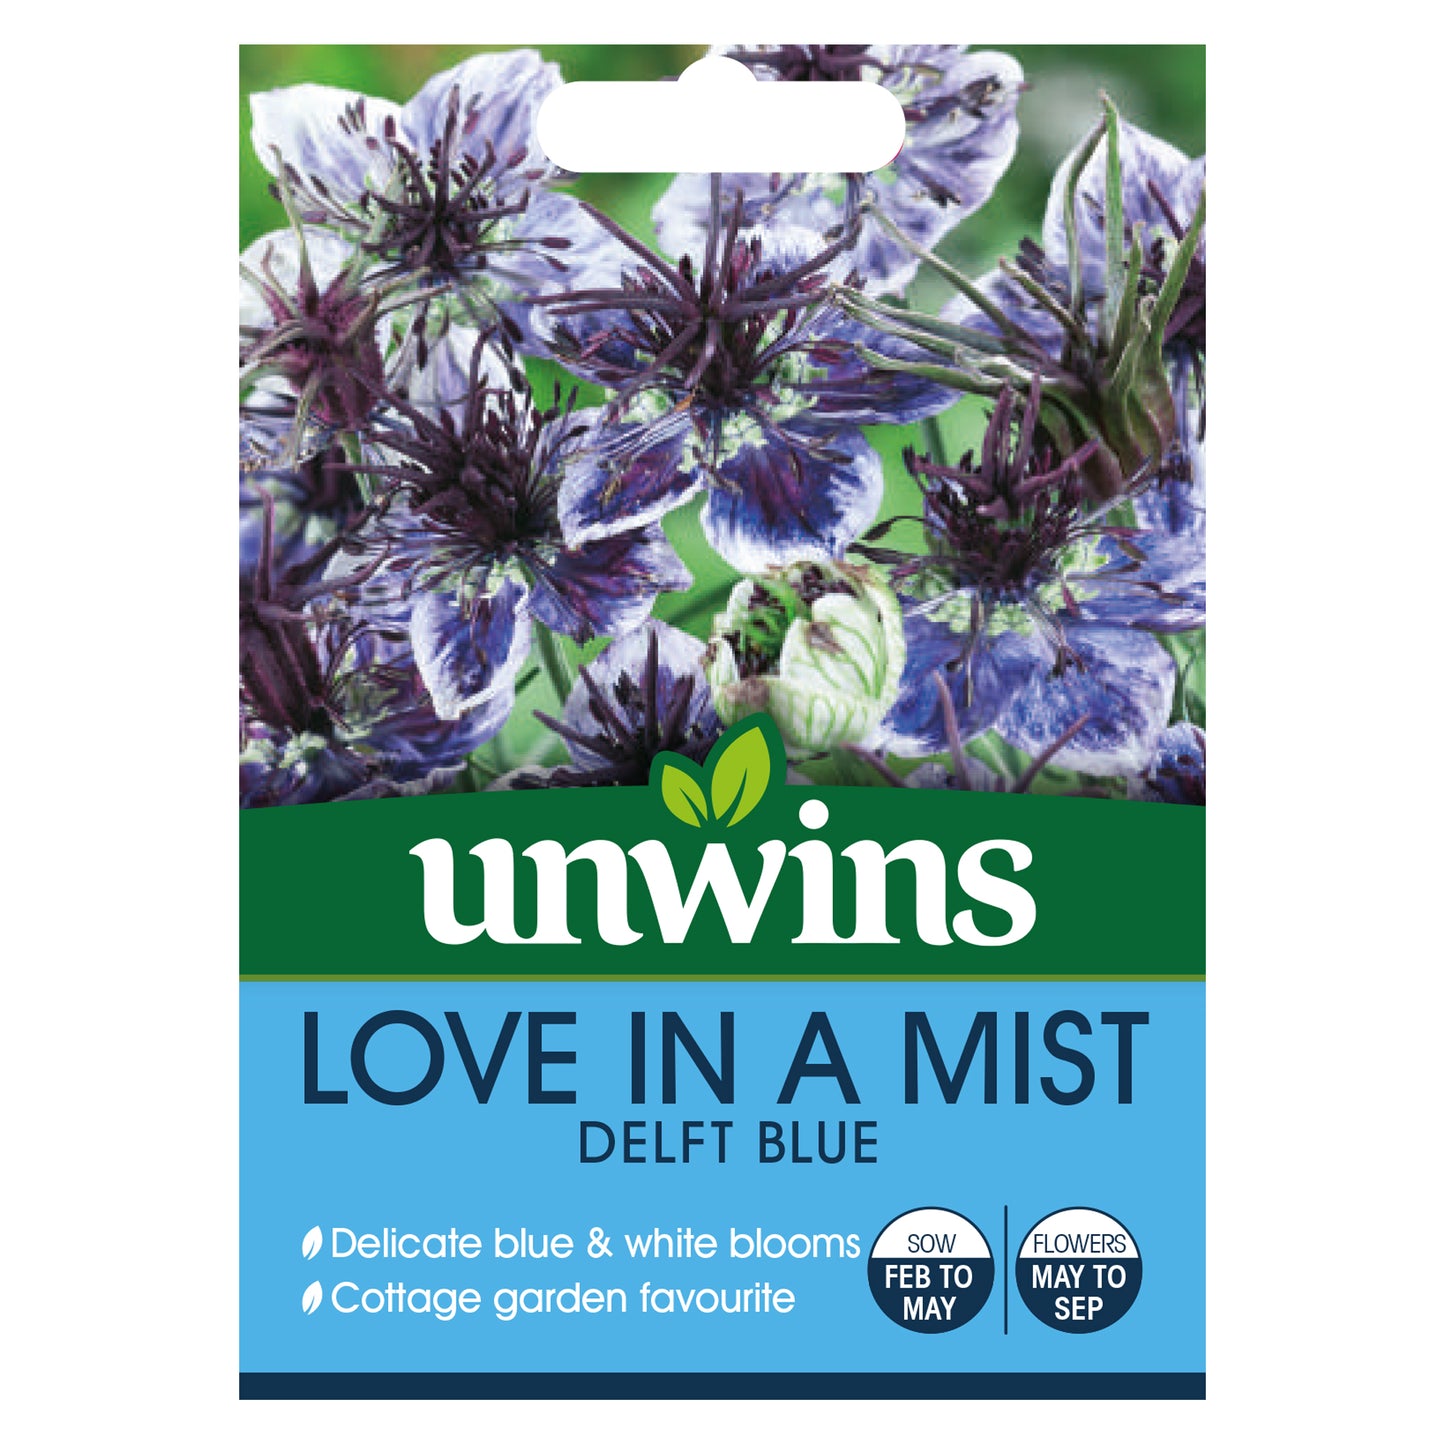 Unwins Love in a Mist Delft Blue Seeds front of pack